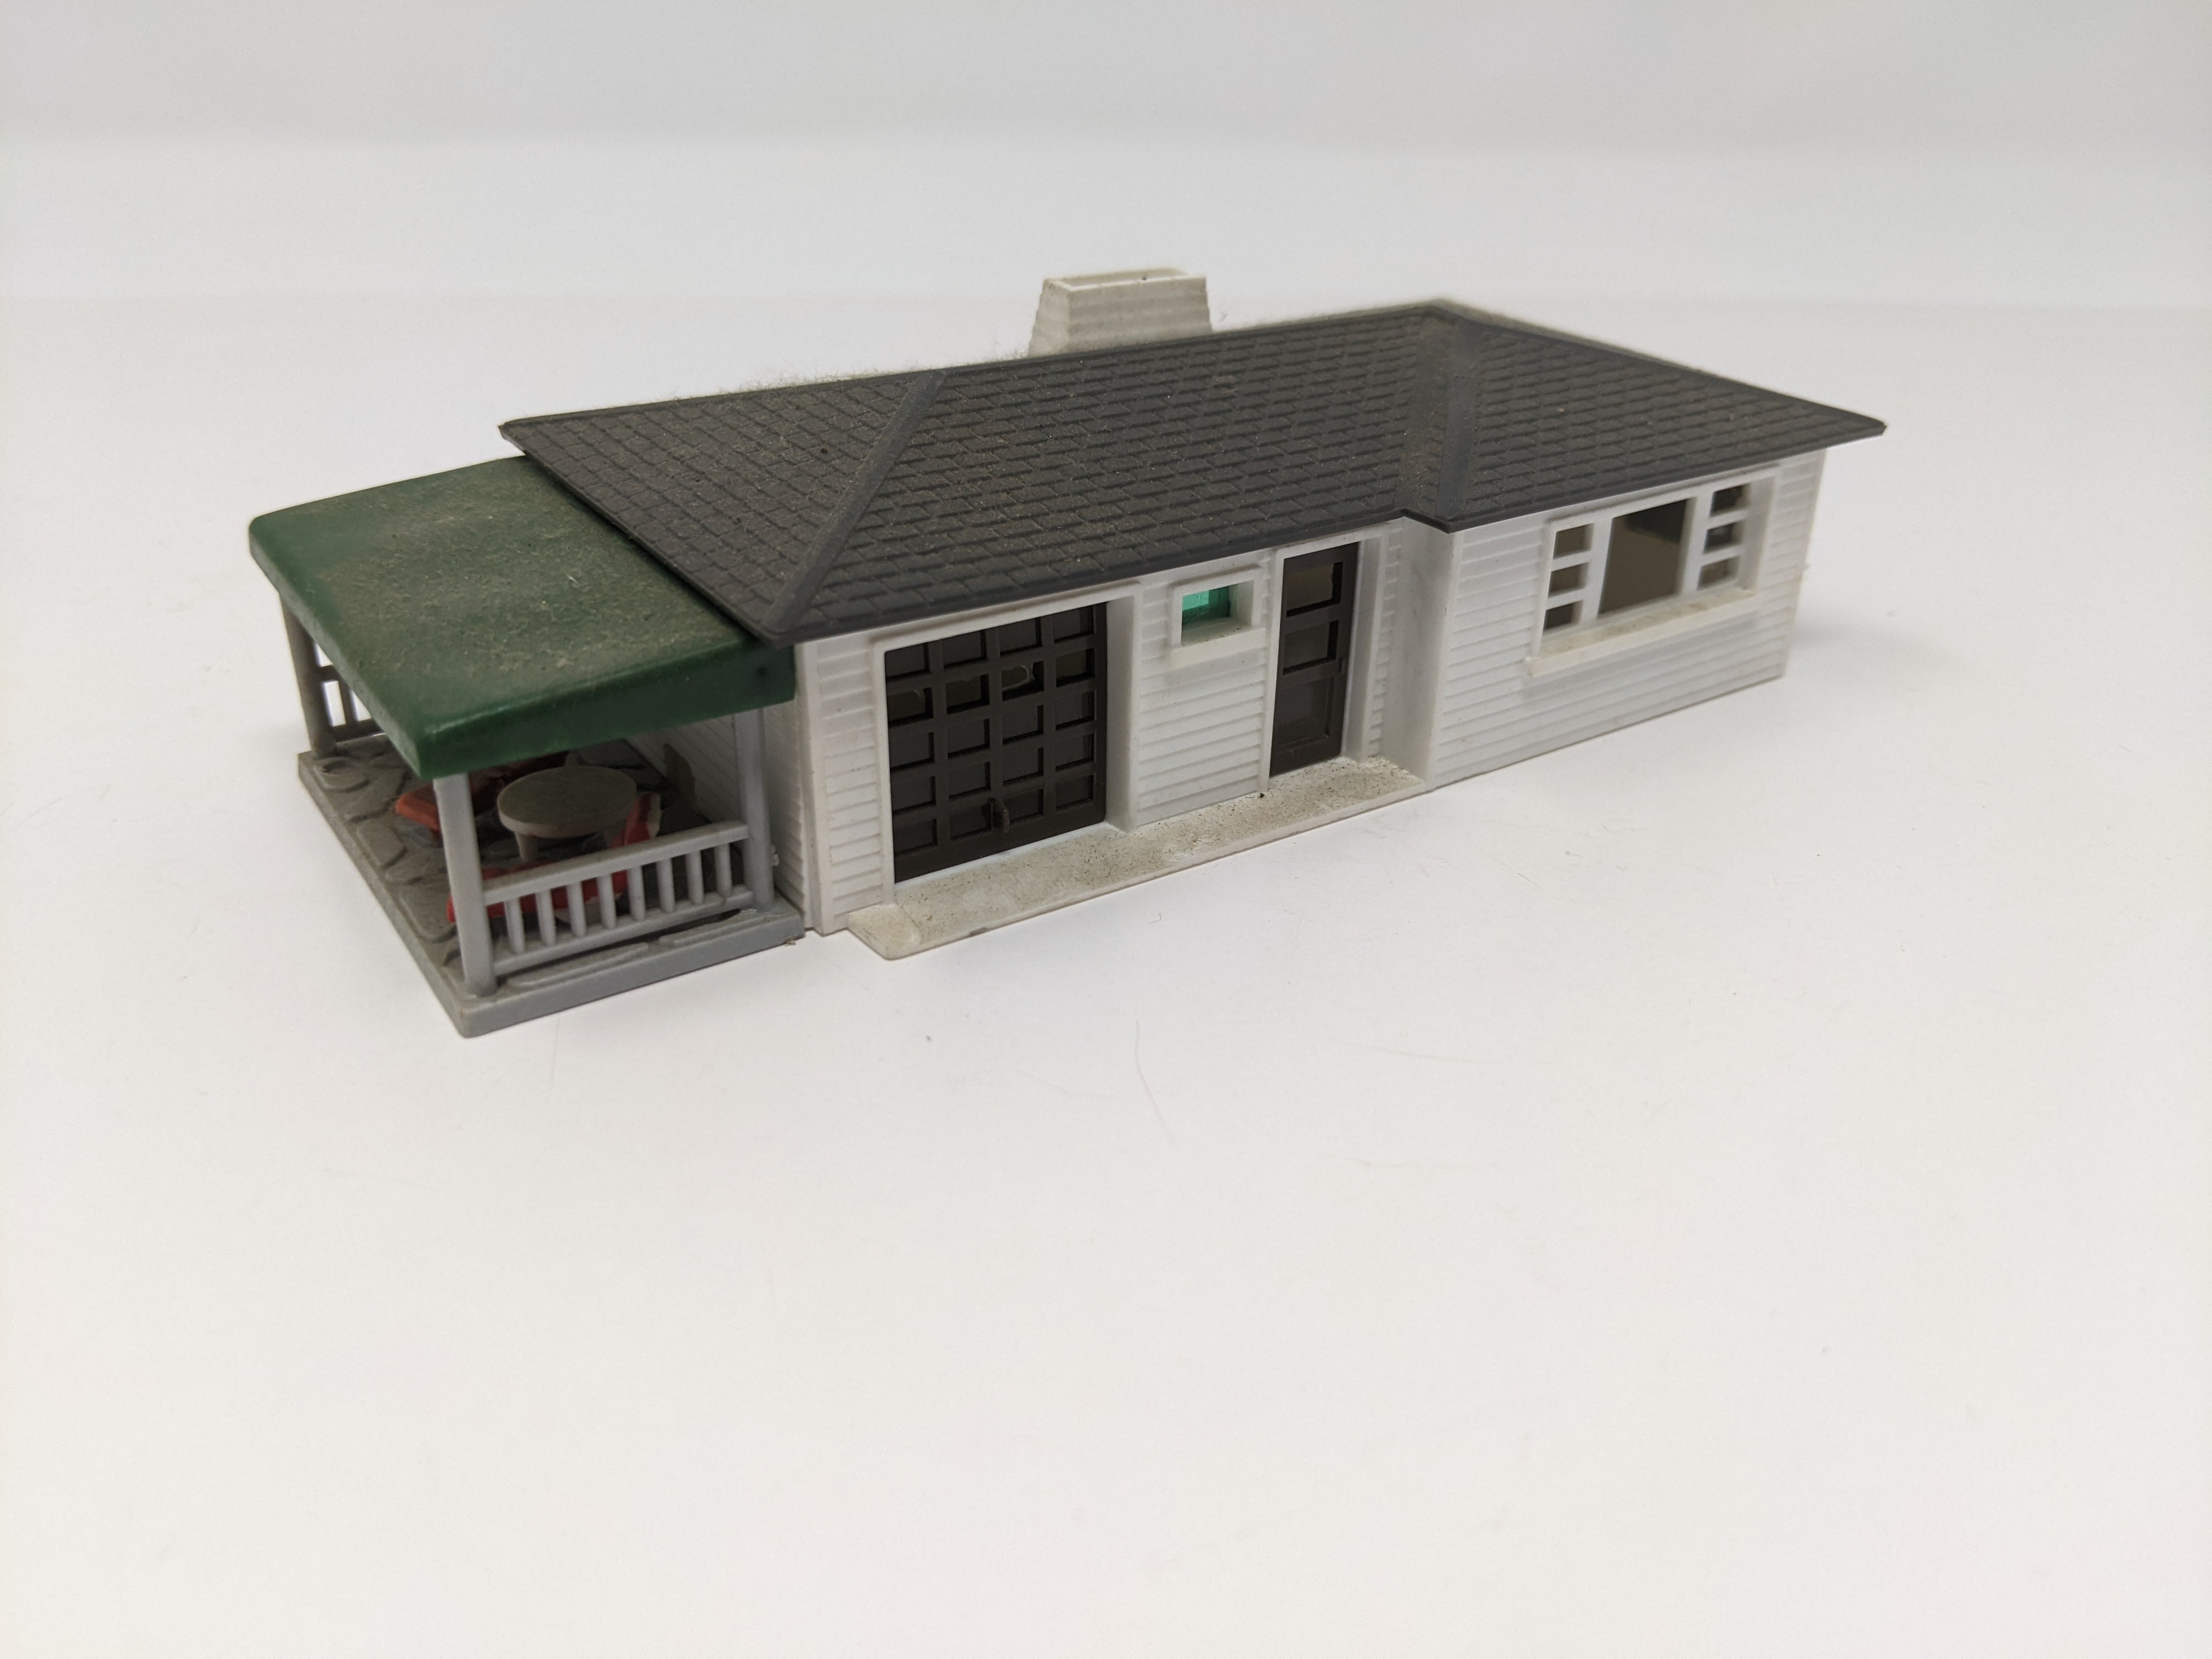 USED Bachmann Plasticville HO Scale, Smal Ranch House with Patio Furniture, Read Description